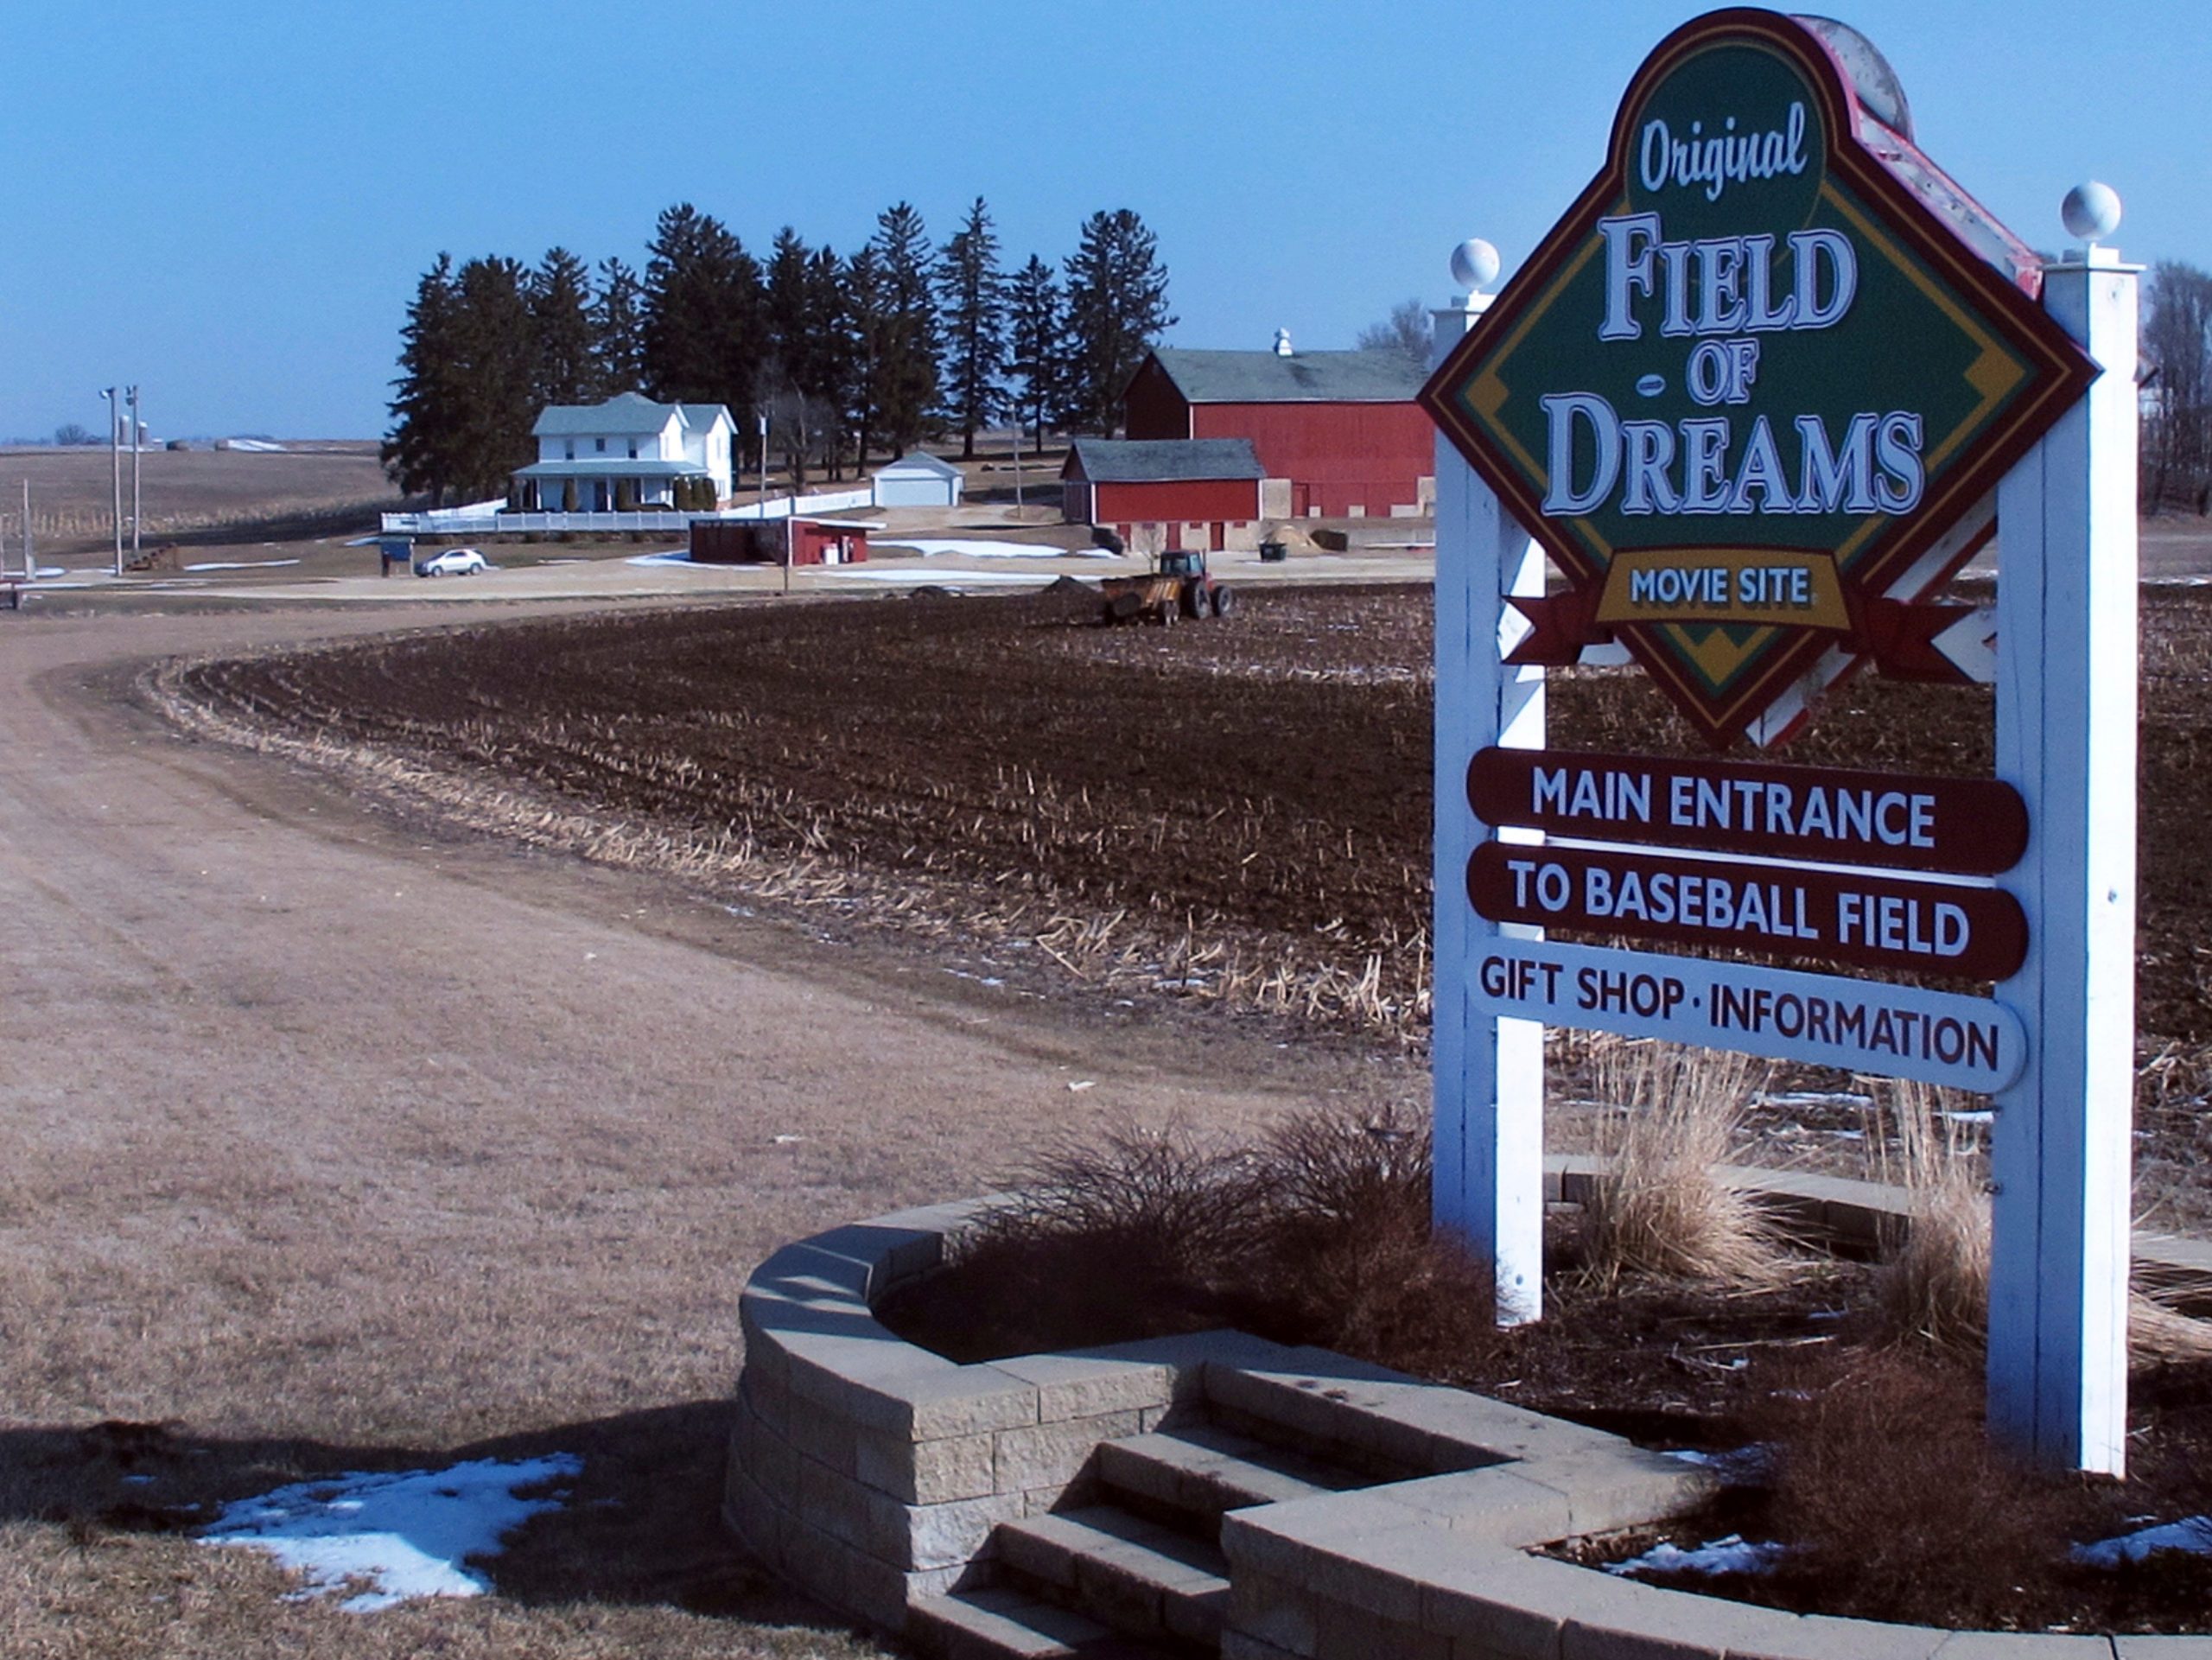 This March 6, 2012, file photo shows the entrance to the "Field of Dreams" movie site in Dyersville, Iowa. Three decades after Kevin Costner's character built a ballpark in a cornfield in the movie "Field of Dreams," the iconic site in Dyersville, Iowa, prepares to host the state's first Major League Baseball game at a built-for-the-moment stadium for the Chicago White Sox and New York Yankees.